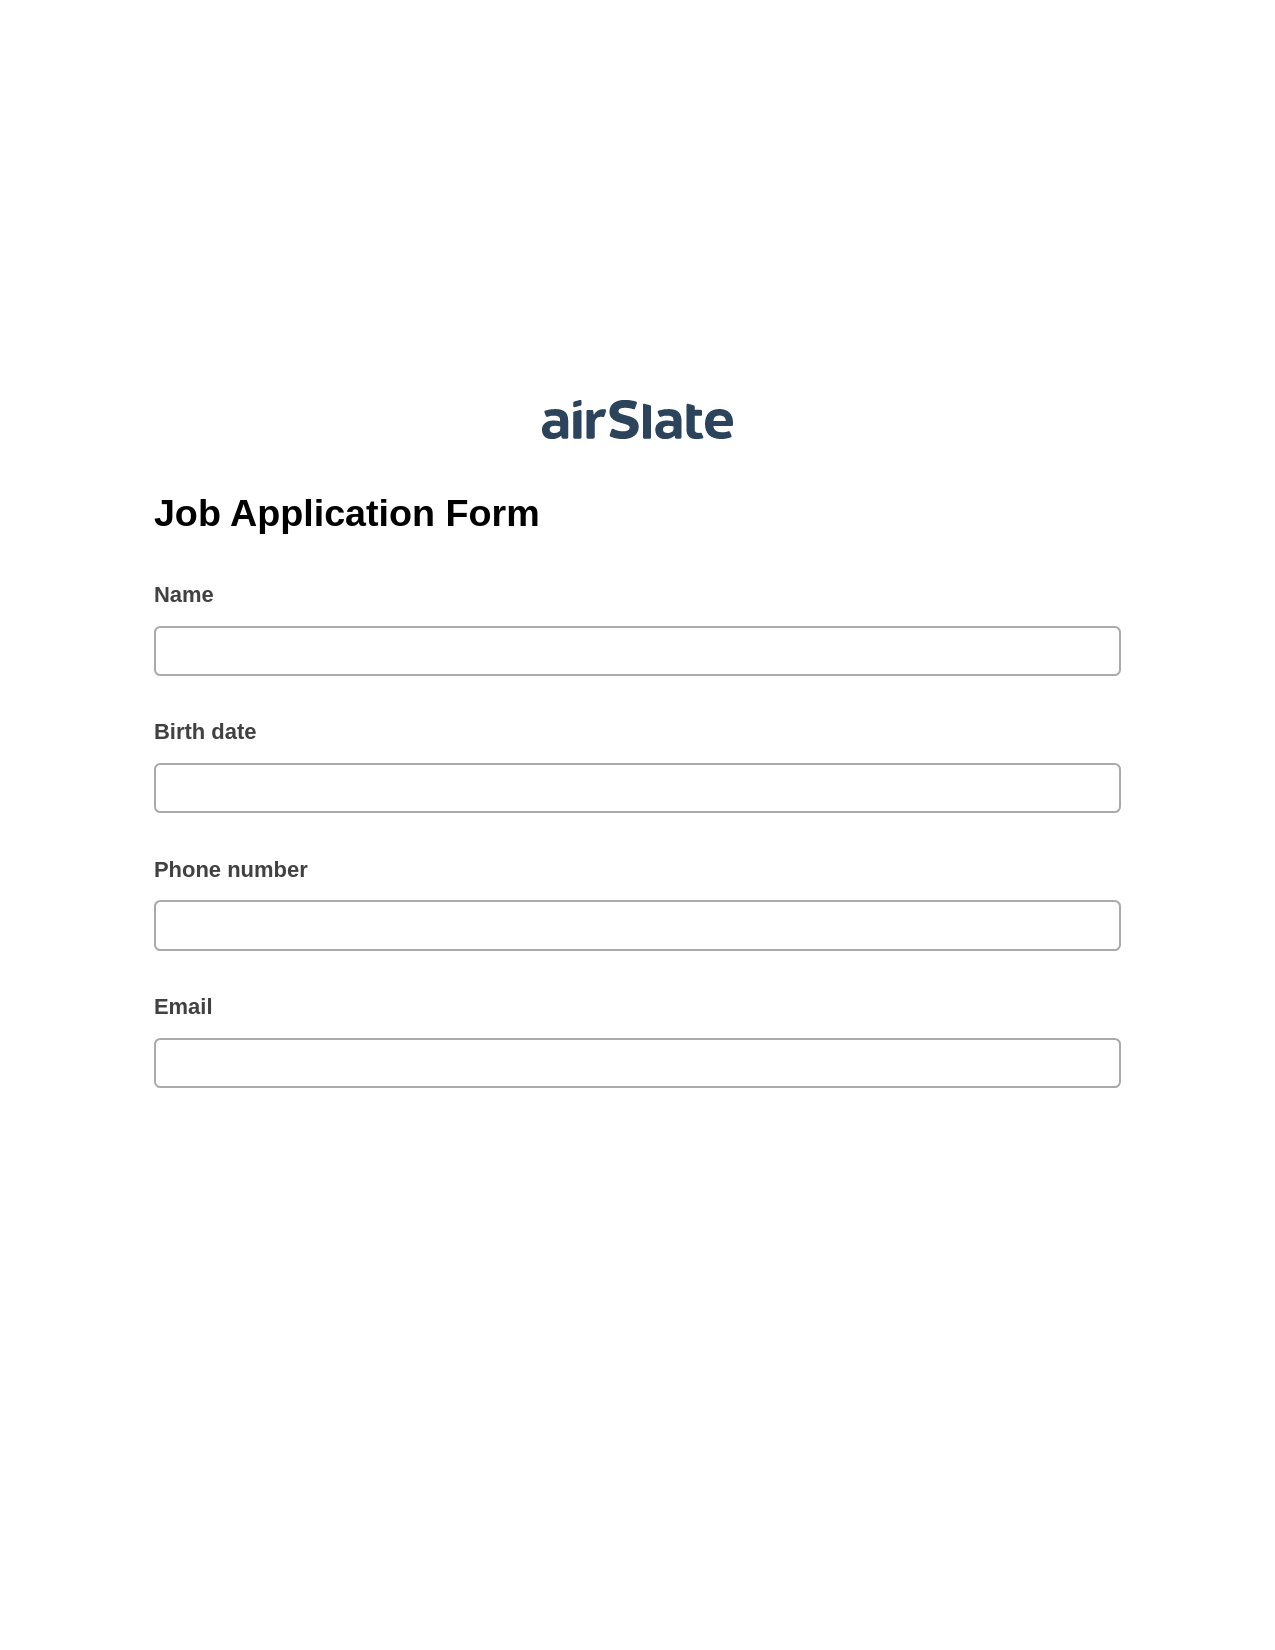 Multirole Job Application Form Pre-fill from Excel Spreadsheet Dropdown Options Bot, Create Slate from another Flow Bot, Text Message Notification Postfinish Bot